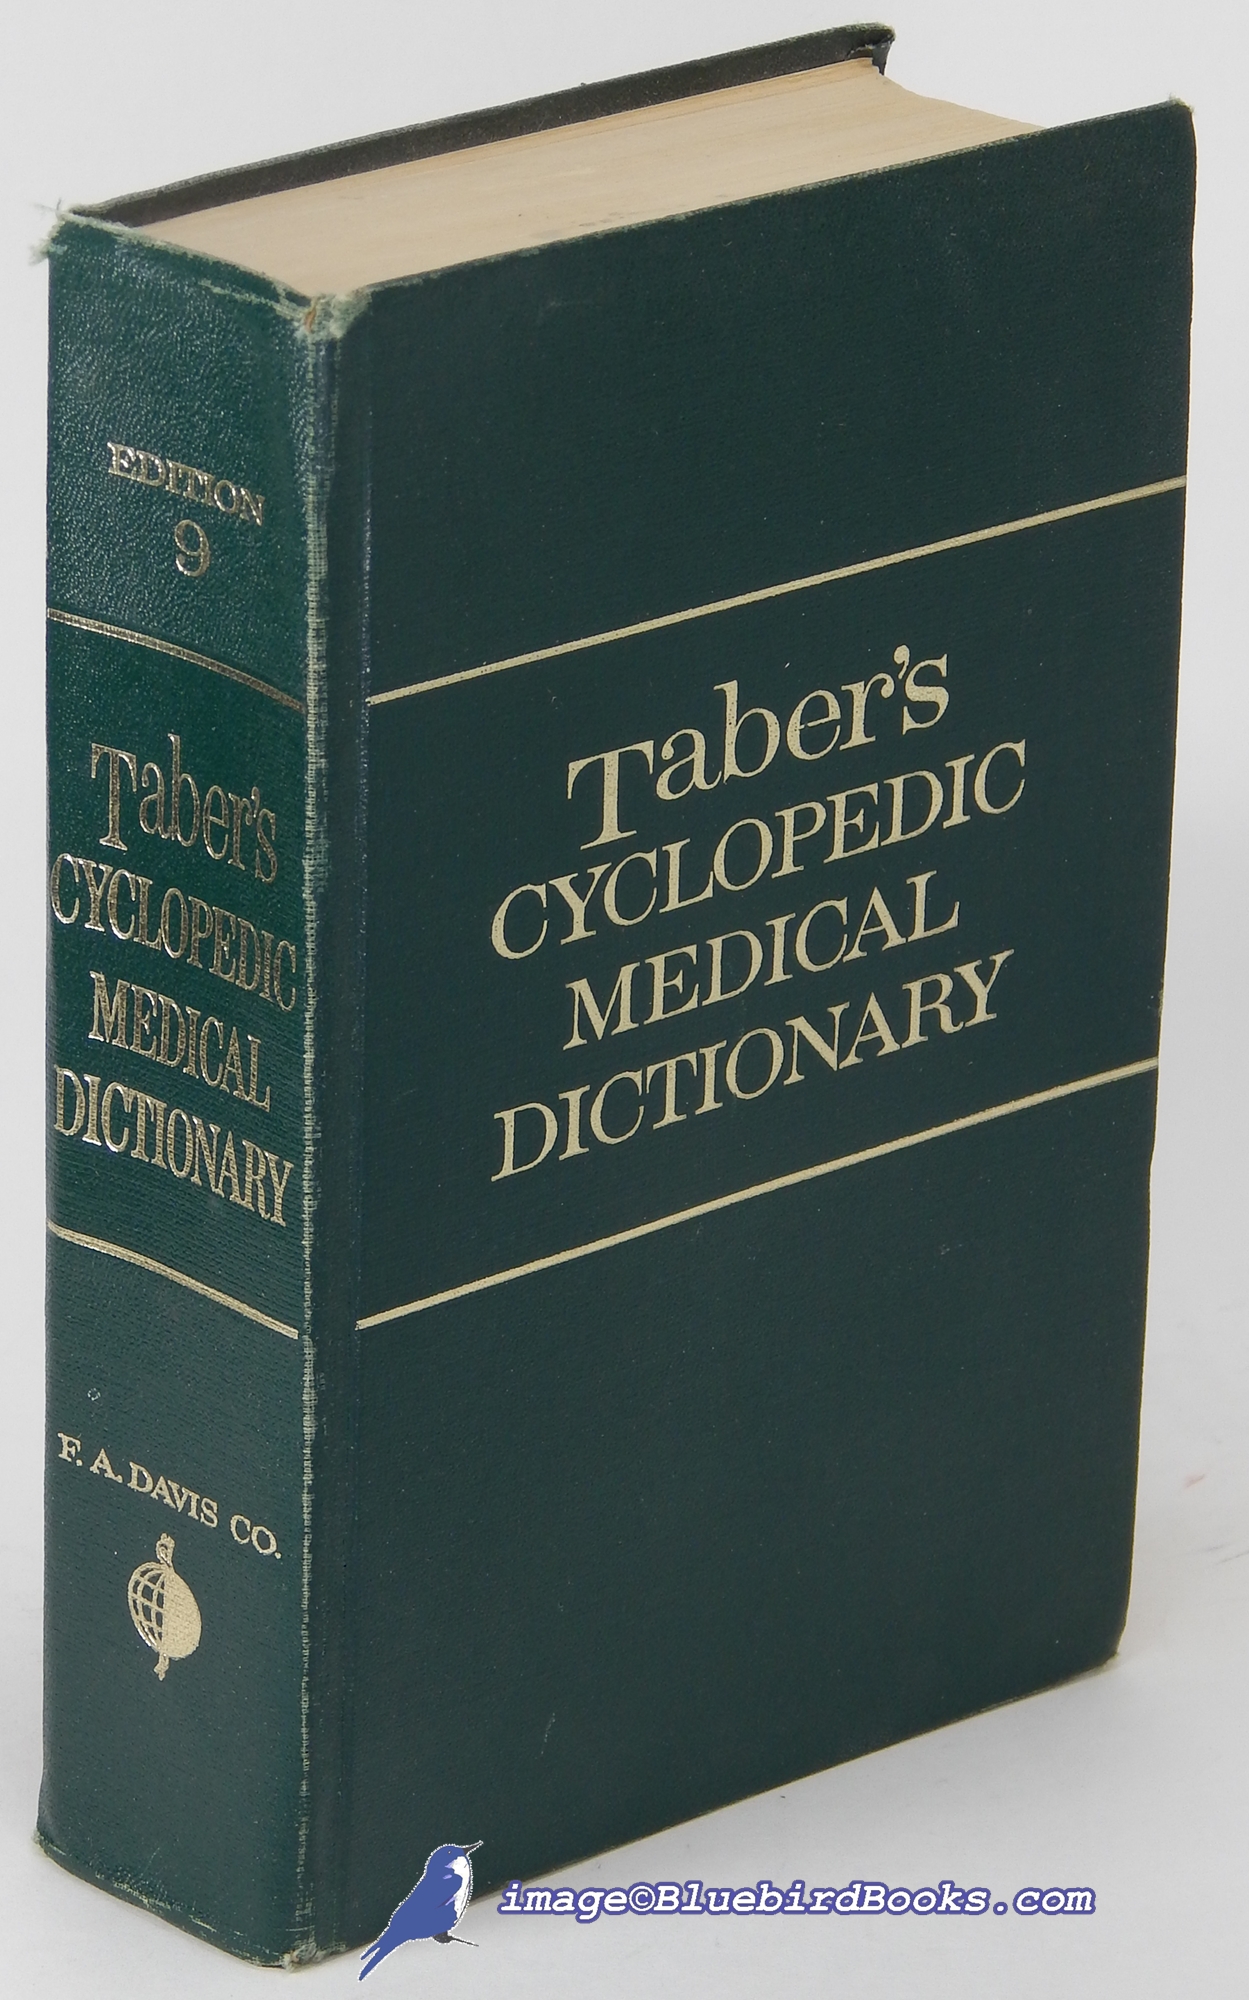 TABER, CLARENCE WILBUR - Taber's Cyclopedic Medical Dictionary: Ninth Edition, Illustrated